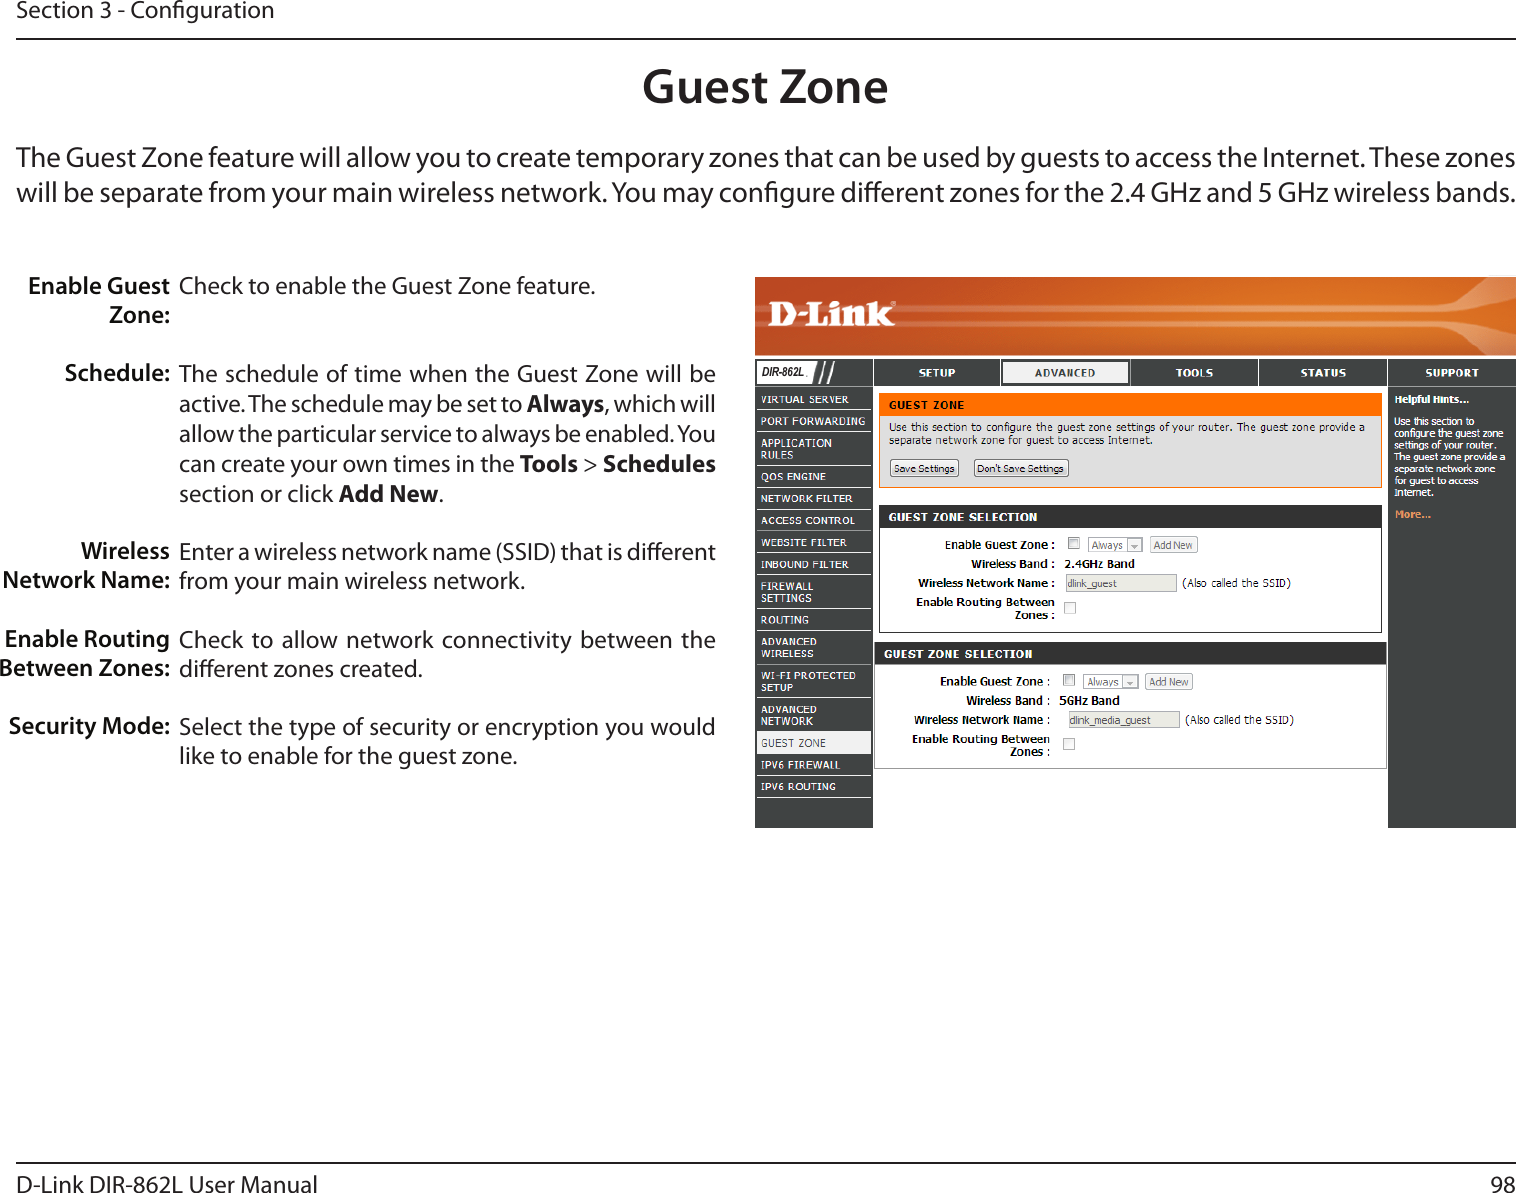 98D-Link DIR-862L User ManualSection 3 - CongurationGuest ZoneCheck to enable the Guest Zone feature. The schedule of time when the Guest Zone will be active. The schedule may be set to Always, which will allow the particular service to always be enabled. You can create your own times in the Tools &gt; Schedules section or click Add New.Enter a wireless network name (SSID) that is dierent from your main wireless network.Check to allow network connectivity between the dierent zones created. Select the type of security or encryption you would like to enable for the guest zone.  Enable Guest Zone:Schedule:Wireless Network Name:Enable Routing Between Zones:Security Mode:The Guest Zone feature will allow you to create temporary zones that can be used by guests to access the Internet. These zones will be separate from your main wireless network. You may congure dierent zones for the 2.4 GHz and 5 GHz wireless bands.DIR-862L